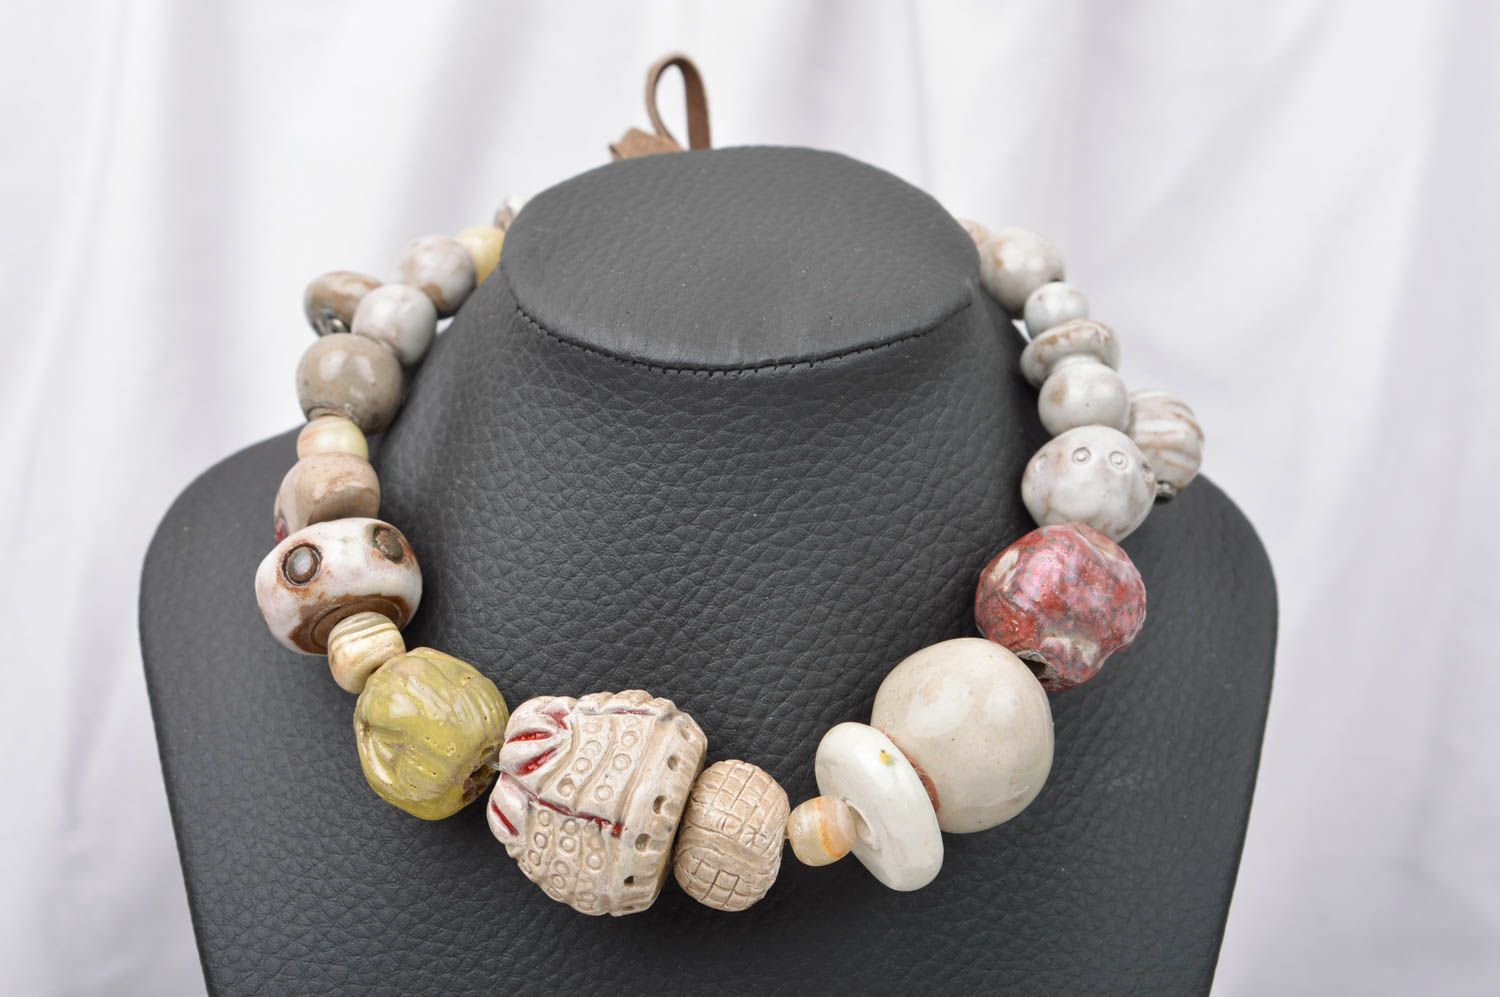 Beautiful handmade ceramic necklace beaded necklace pottery works gifts for her photo 1